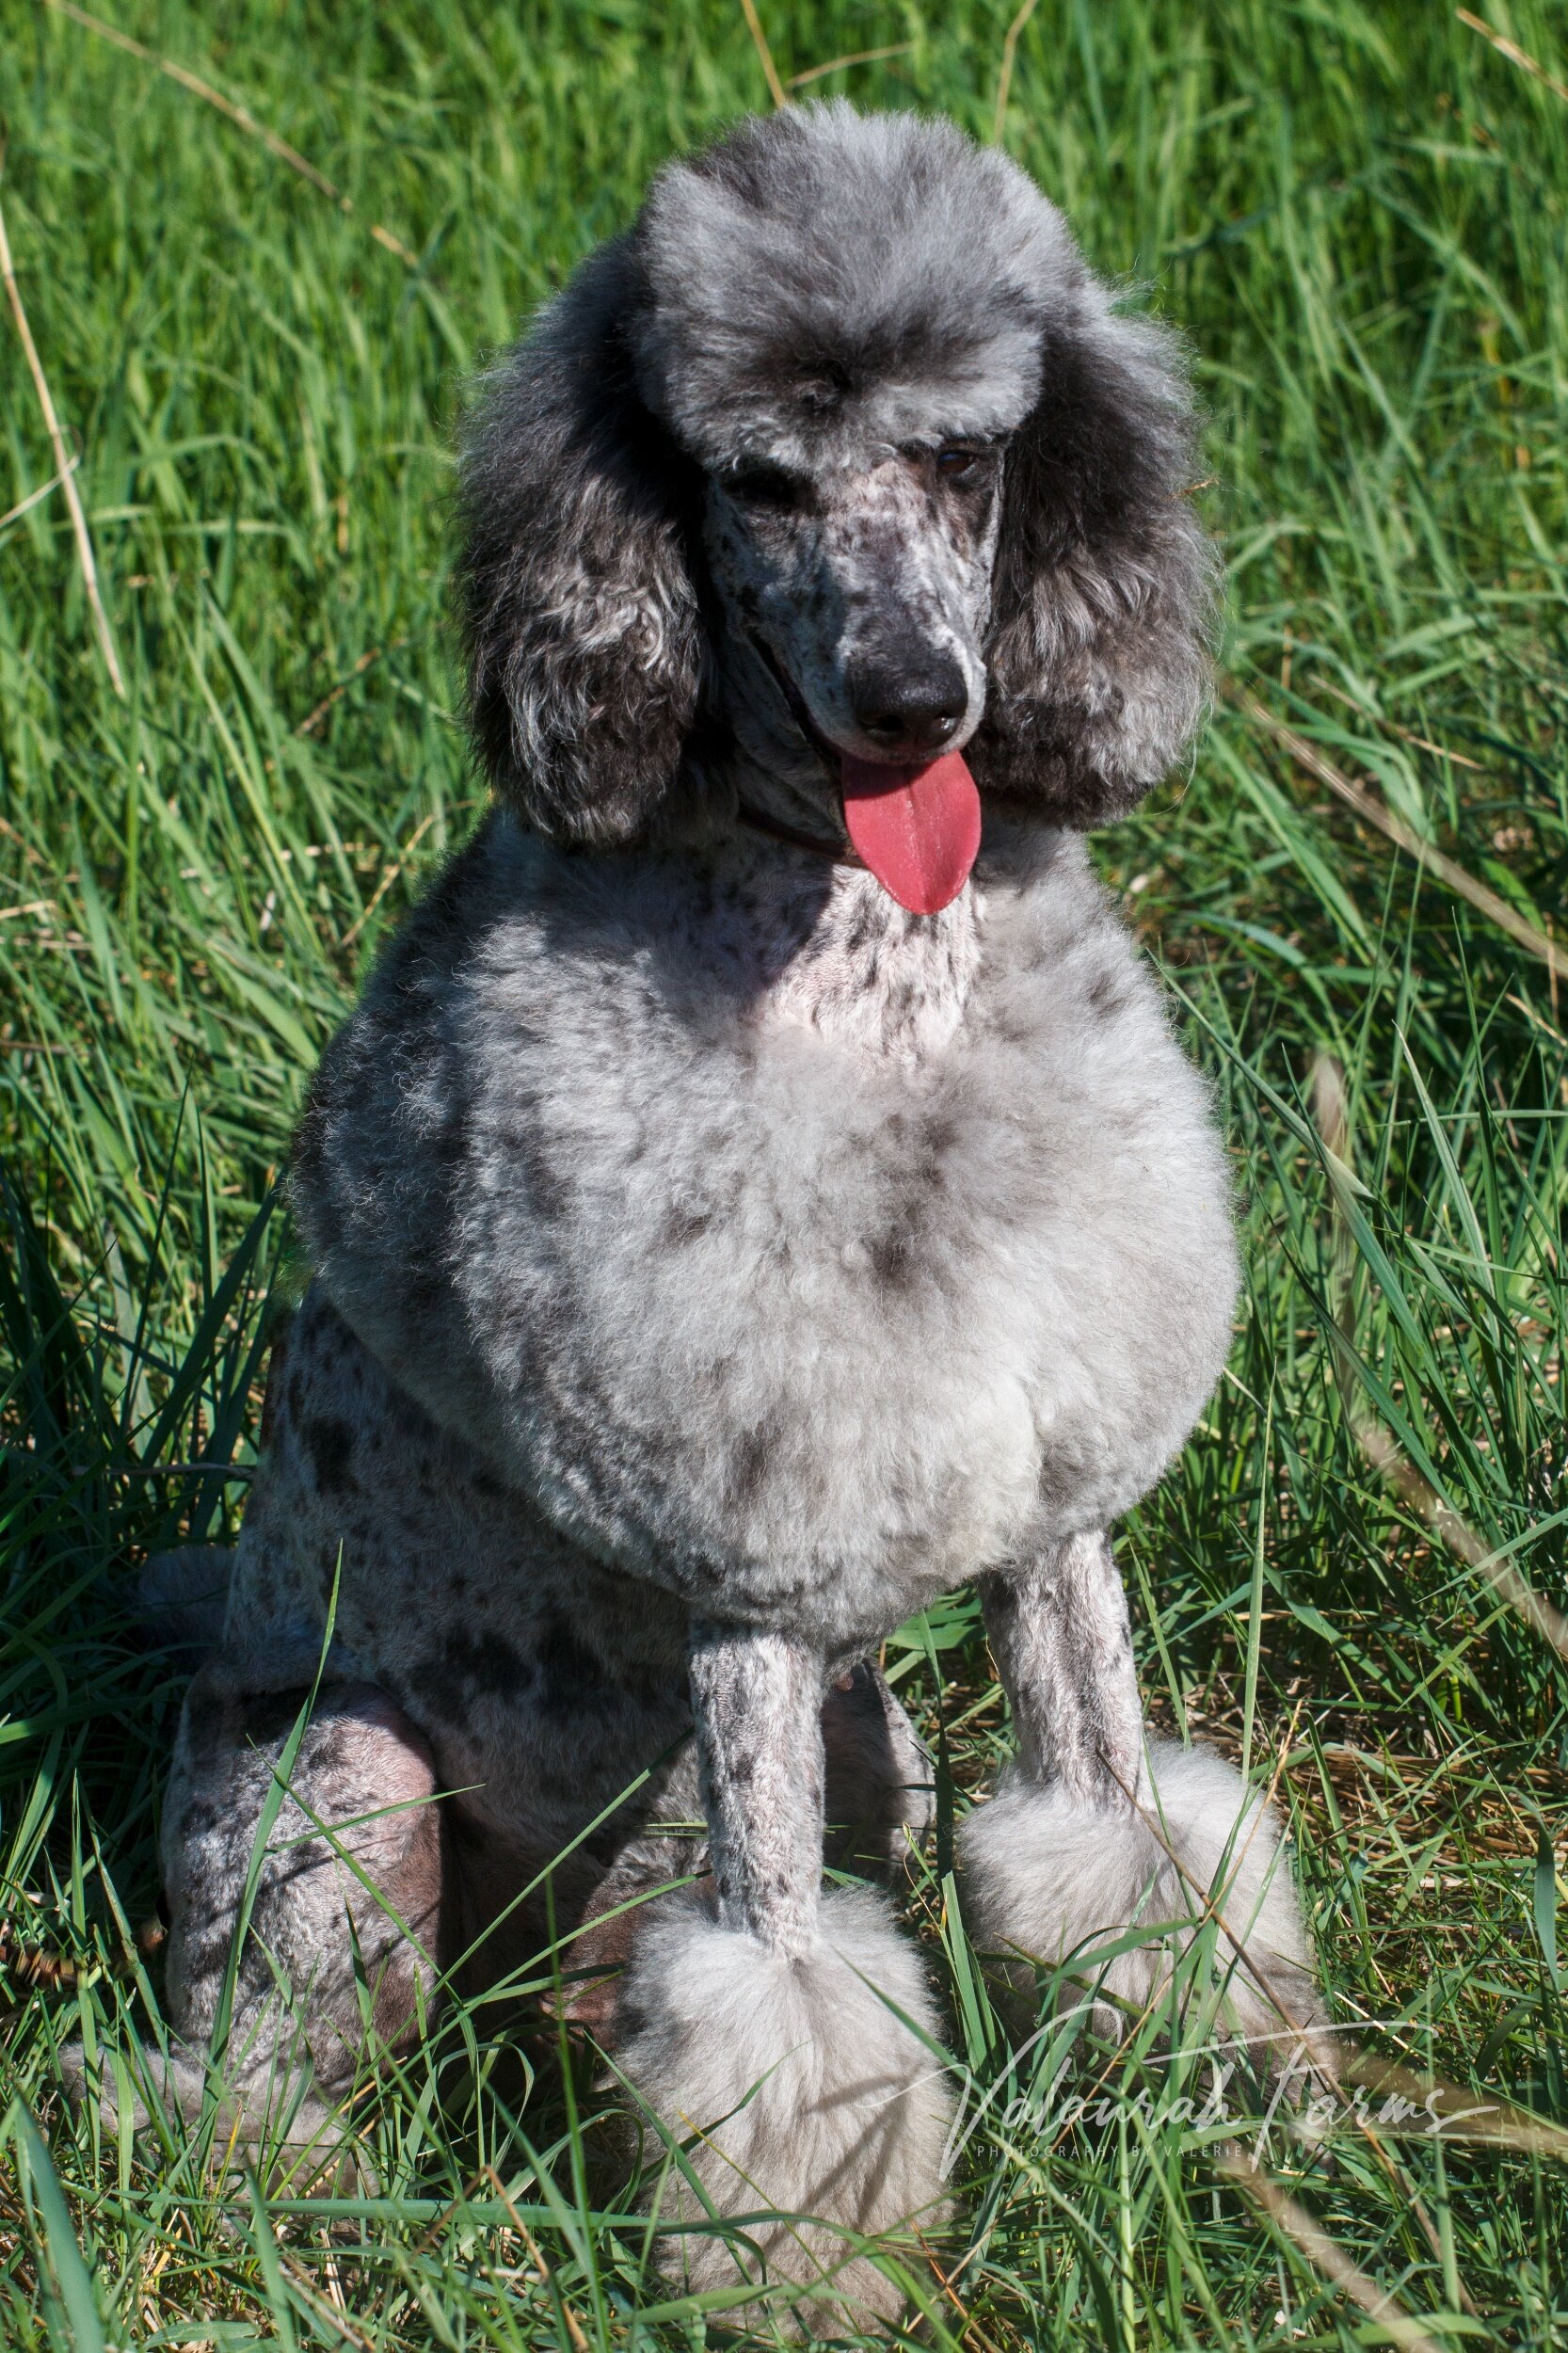 Blue Merle Standard Poodle in Grass